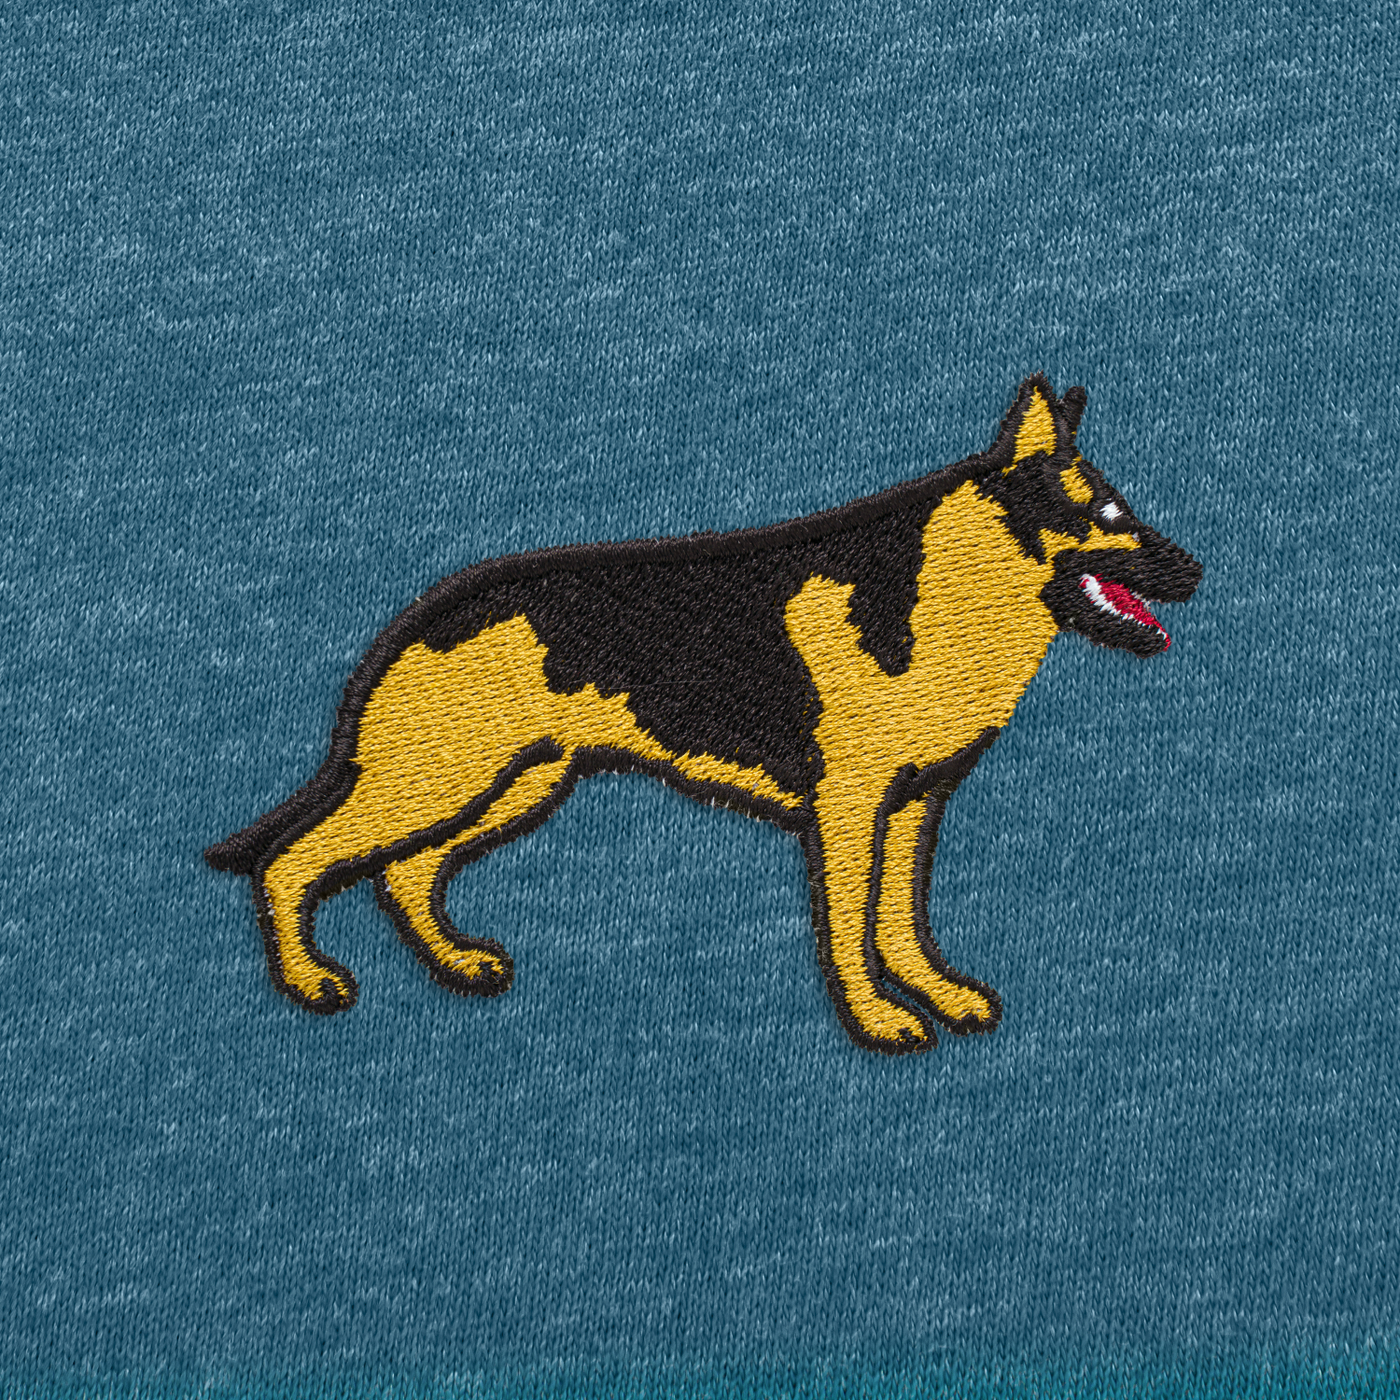 Bobby's Planet Men's Embroidered German Shepherd T-Shirt from Paws Dog Cat Animals Collection in Heather Deep Teal Color#color_heather-deep-teal